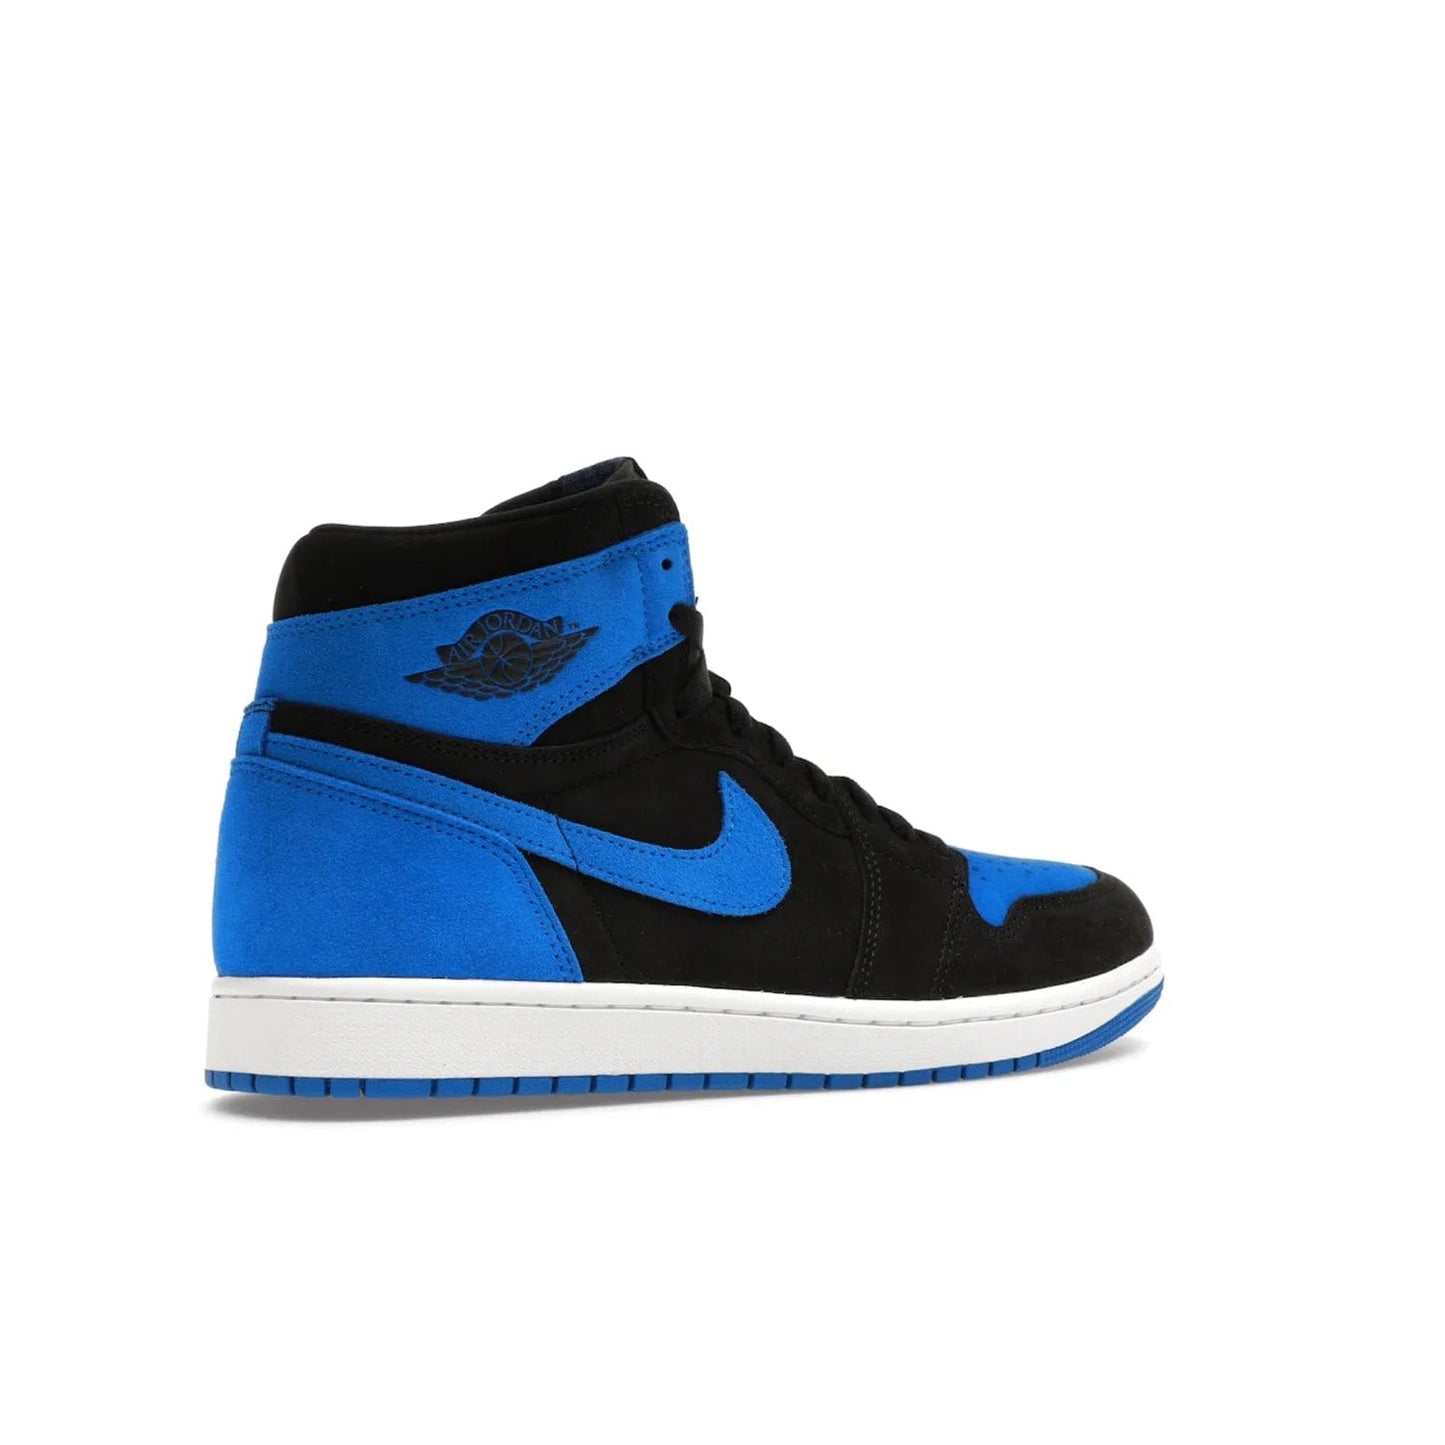 Jordan 1 Retro High OG Royal Reimagined - Image 34 - Only at www.BallersClubKickz.com - ####
Old meets the new: Jordan 1 Retro High OG 'Royal Reimagined' is a bold statement of evolution with its royal blue and black suede material makeup. Swoosh overlays, Wings logos, padded ankle collars and Nike Air tags maintain the OG's legendary lineage. Get a pair on November 4th and be part of a fearless, unyielding story.